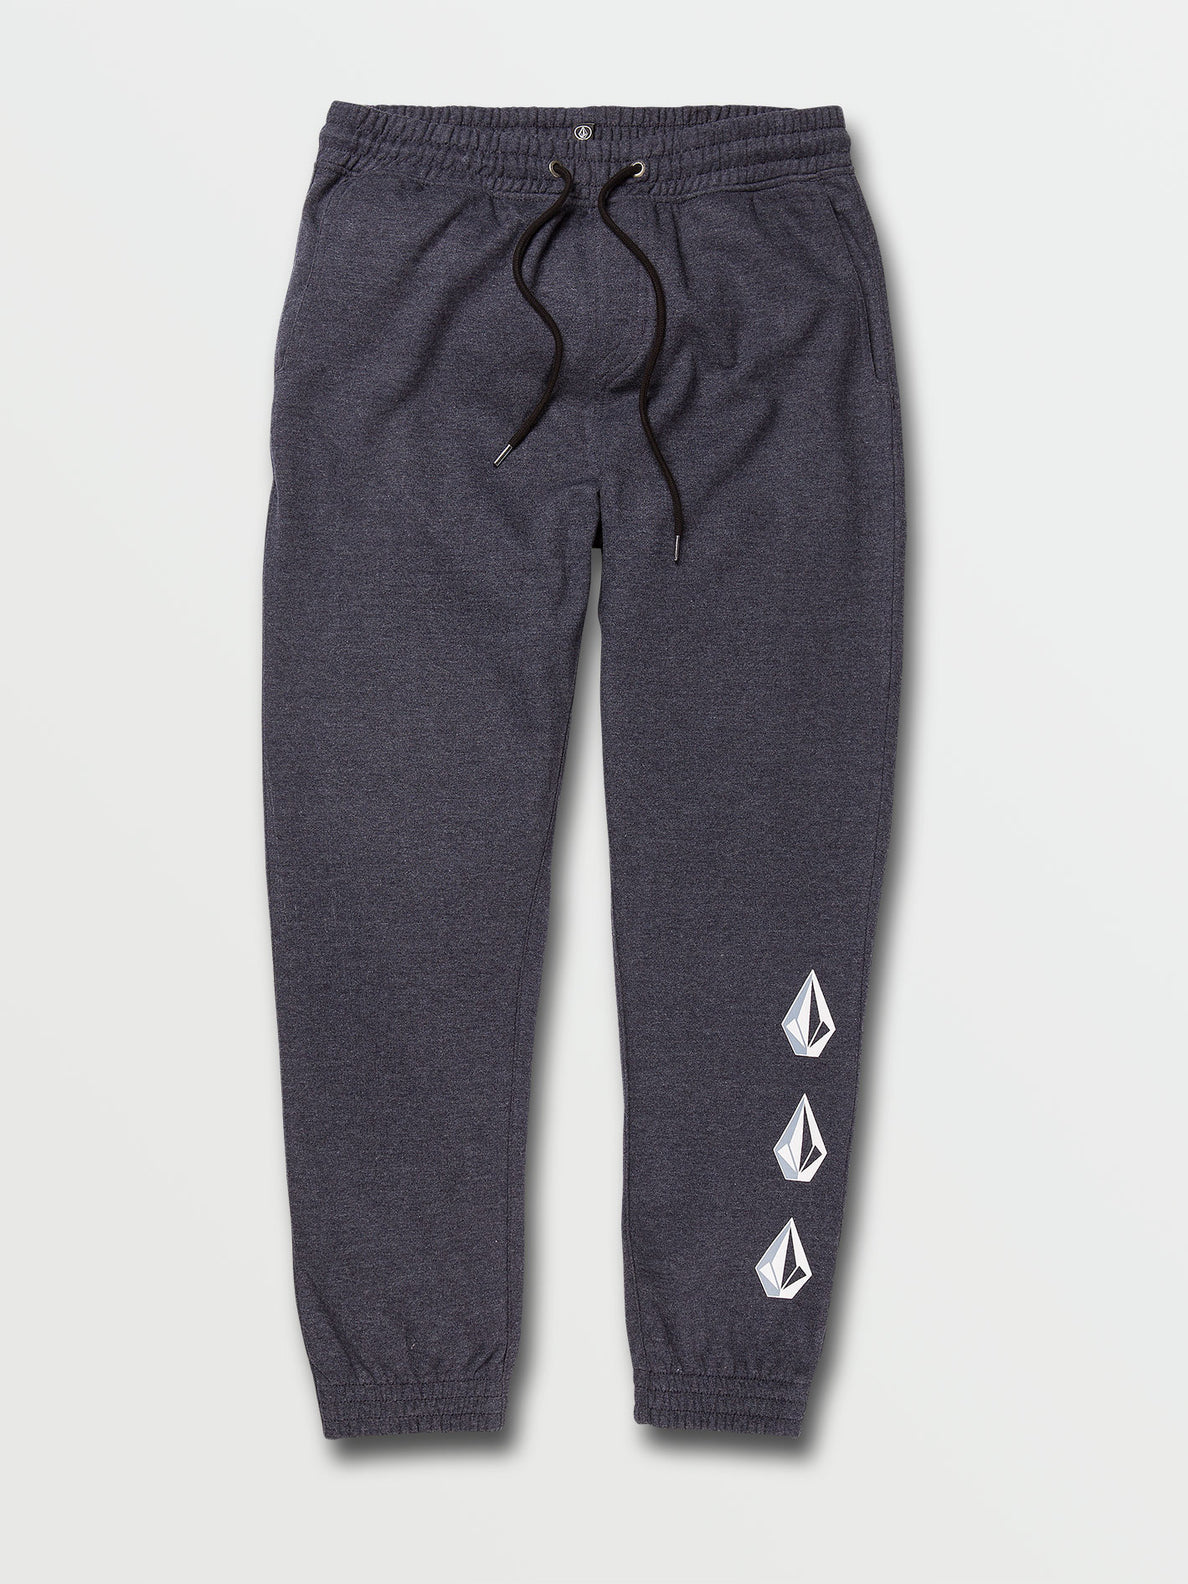 Mens Blaquedout Pants - Navy Heather (A1202104_NVHP) [F]